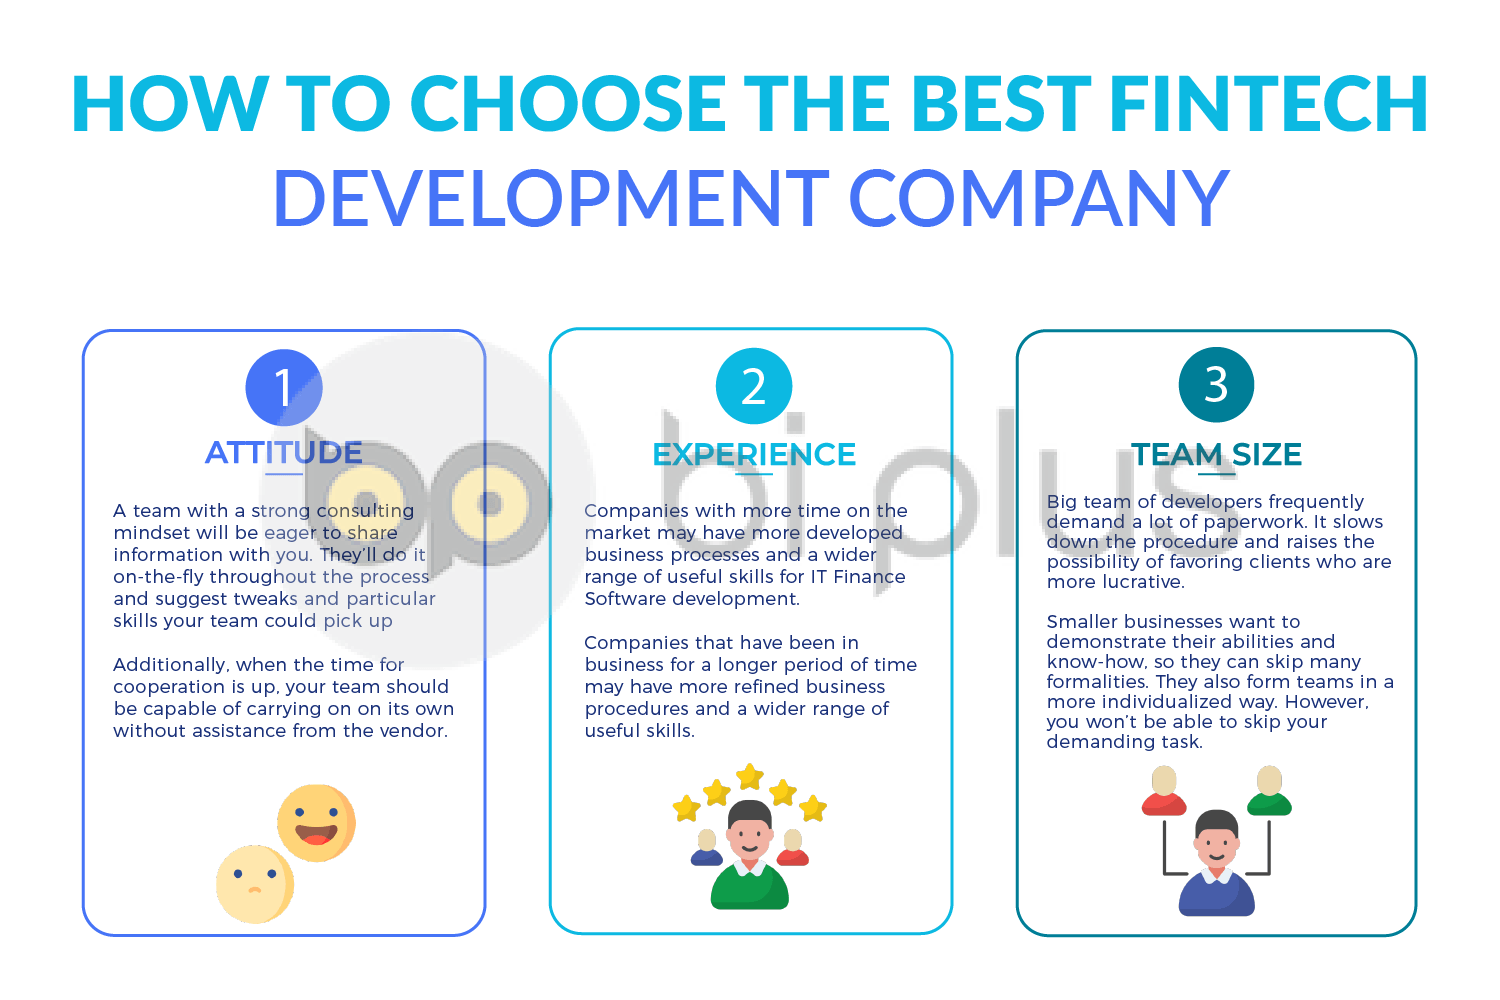 Which one is the best fintech development company for you?